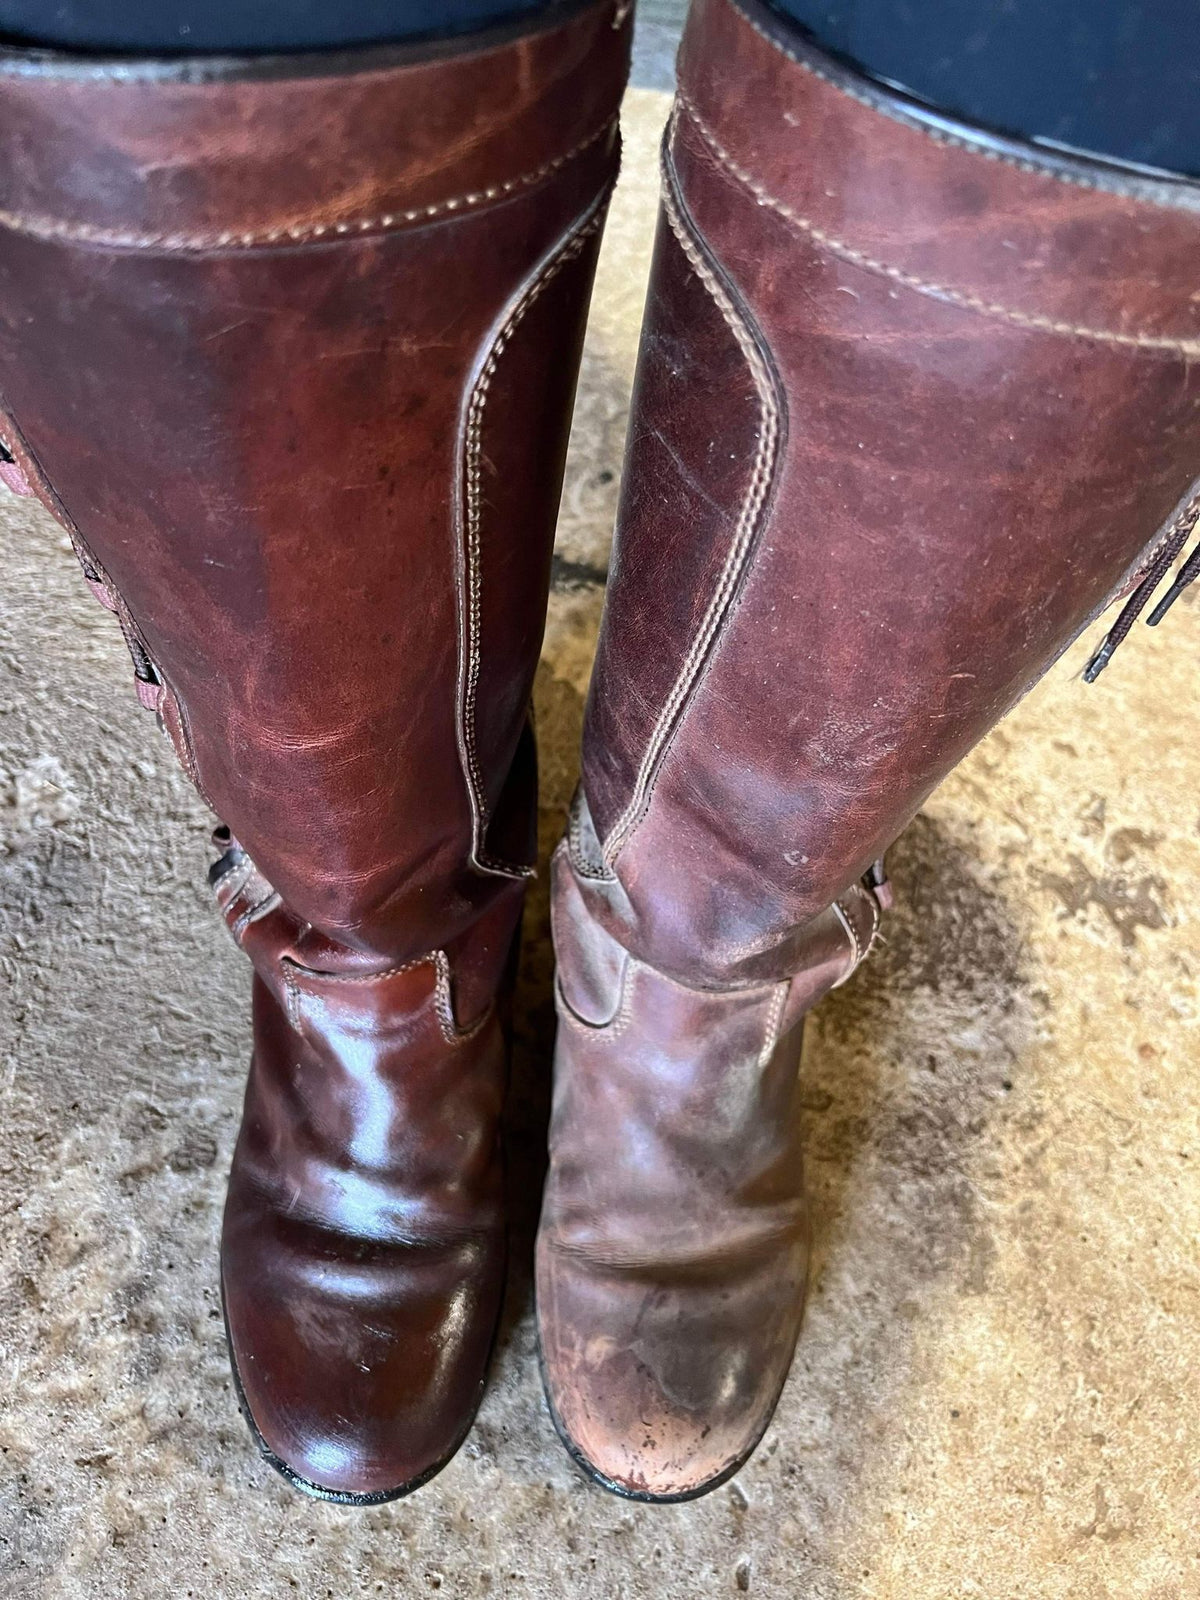 Old riding boots that have not had much care, the boot on the left has been conditioned with Belvoir Leather Balsam. The boot on the right has not.